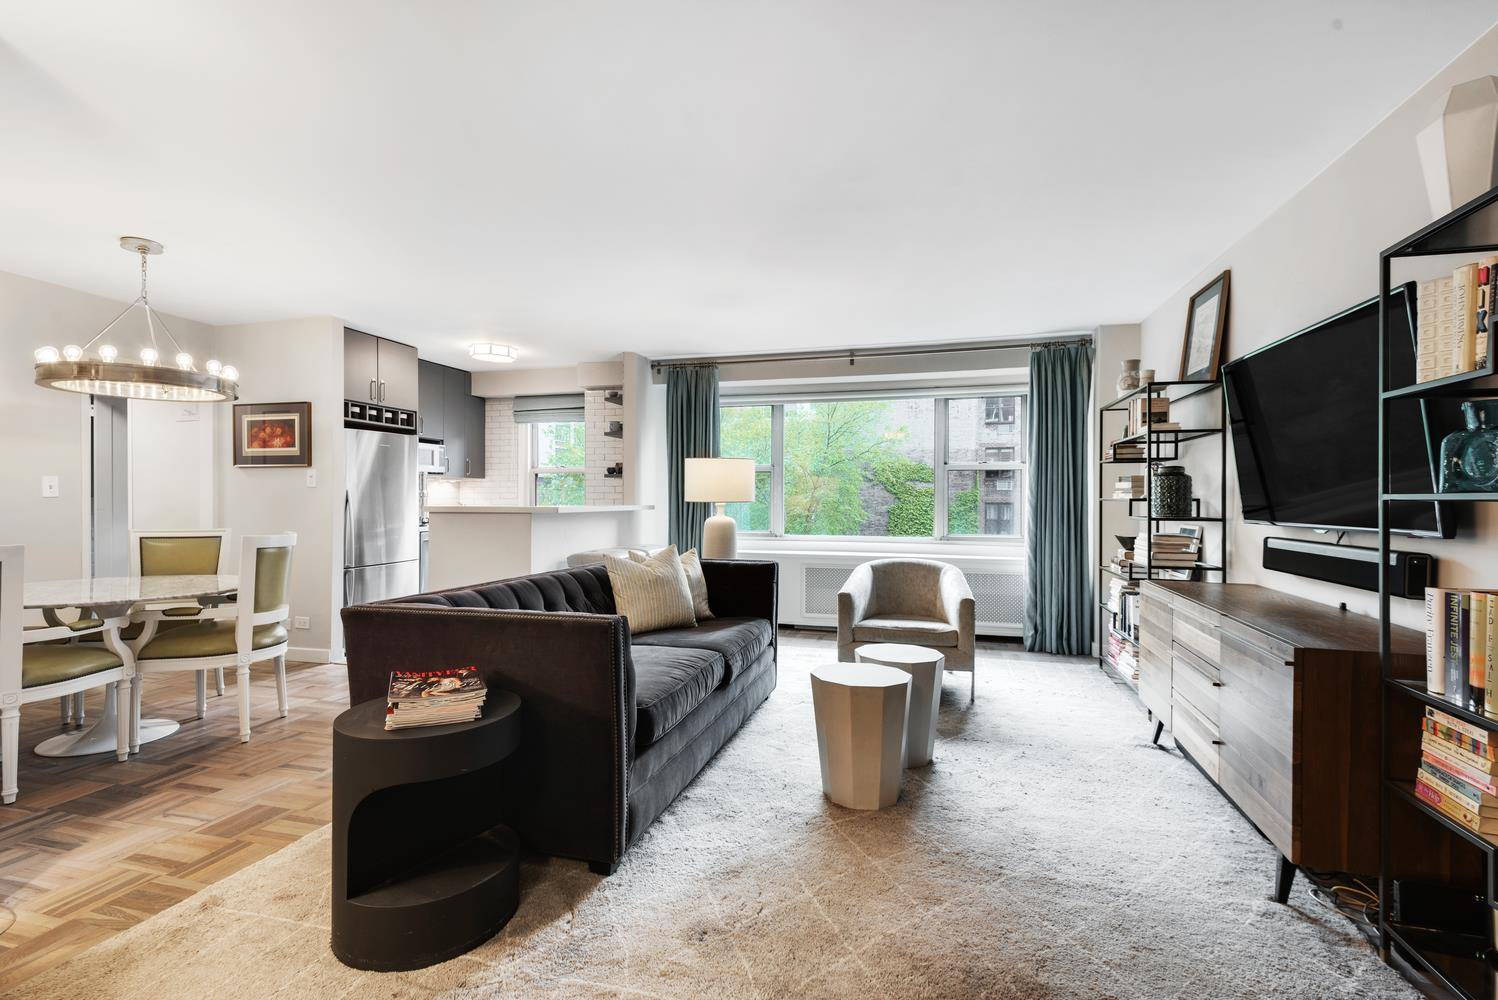 Welcome to this absolutely lovely home in one of Manhattan's most desired neighborhoods.